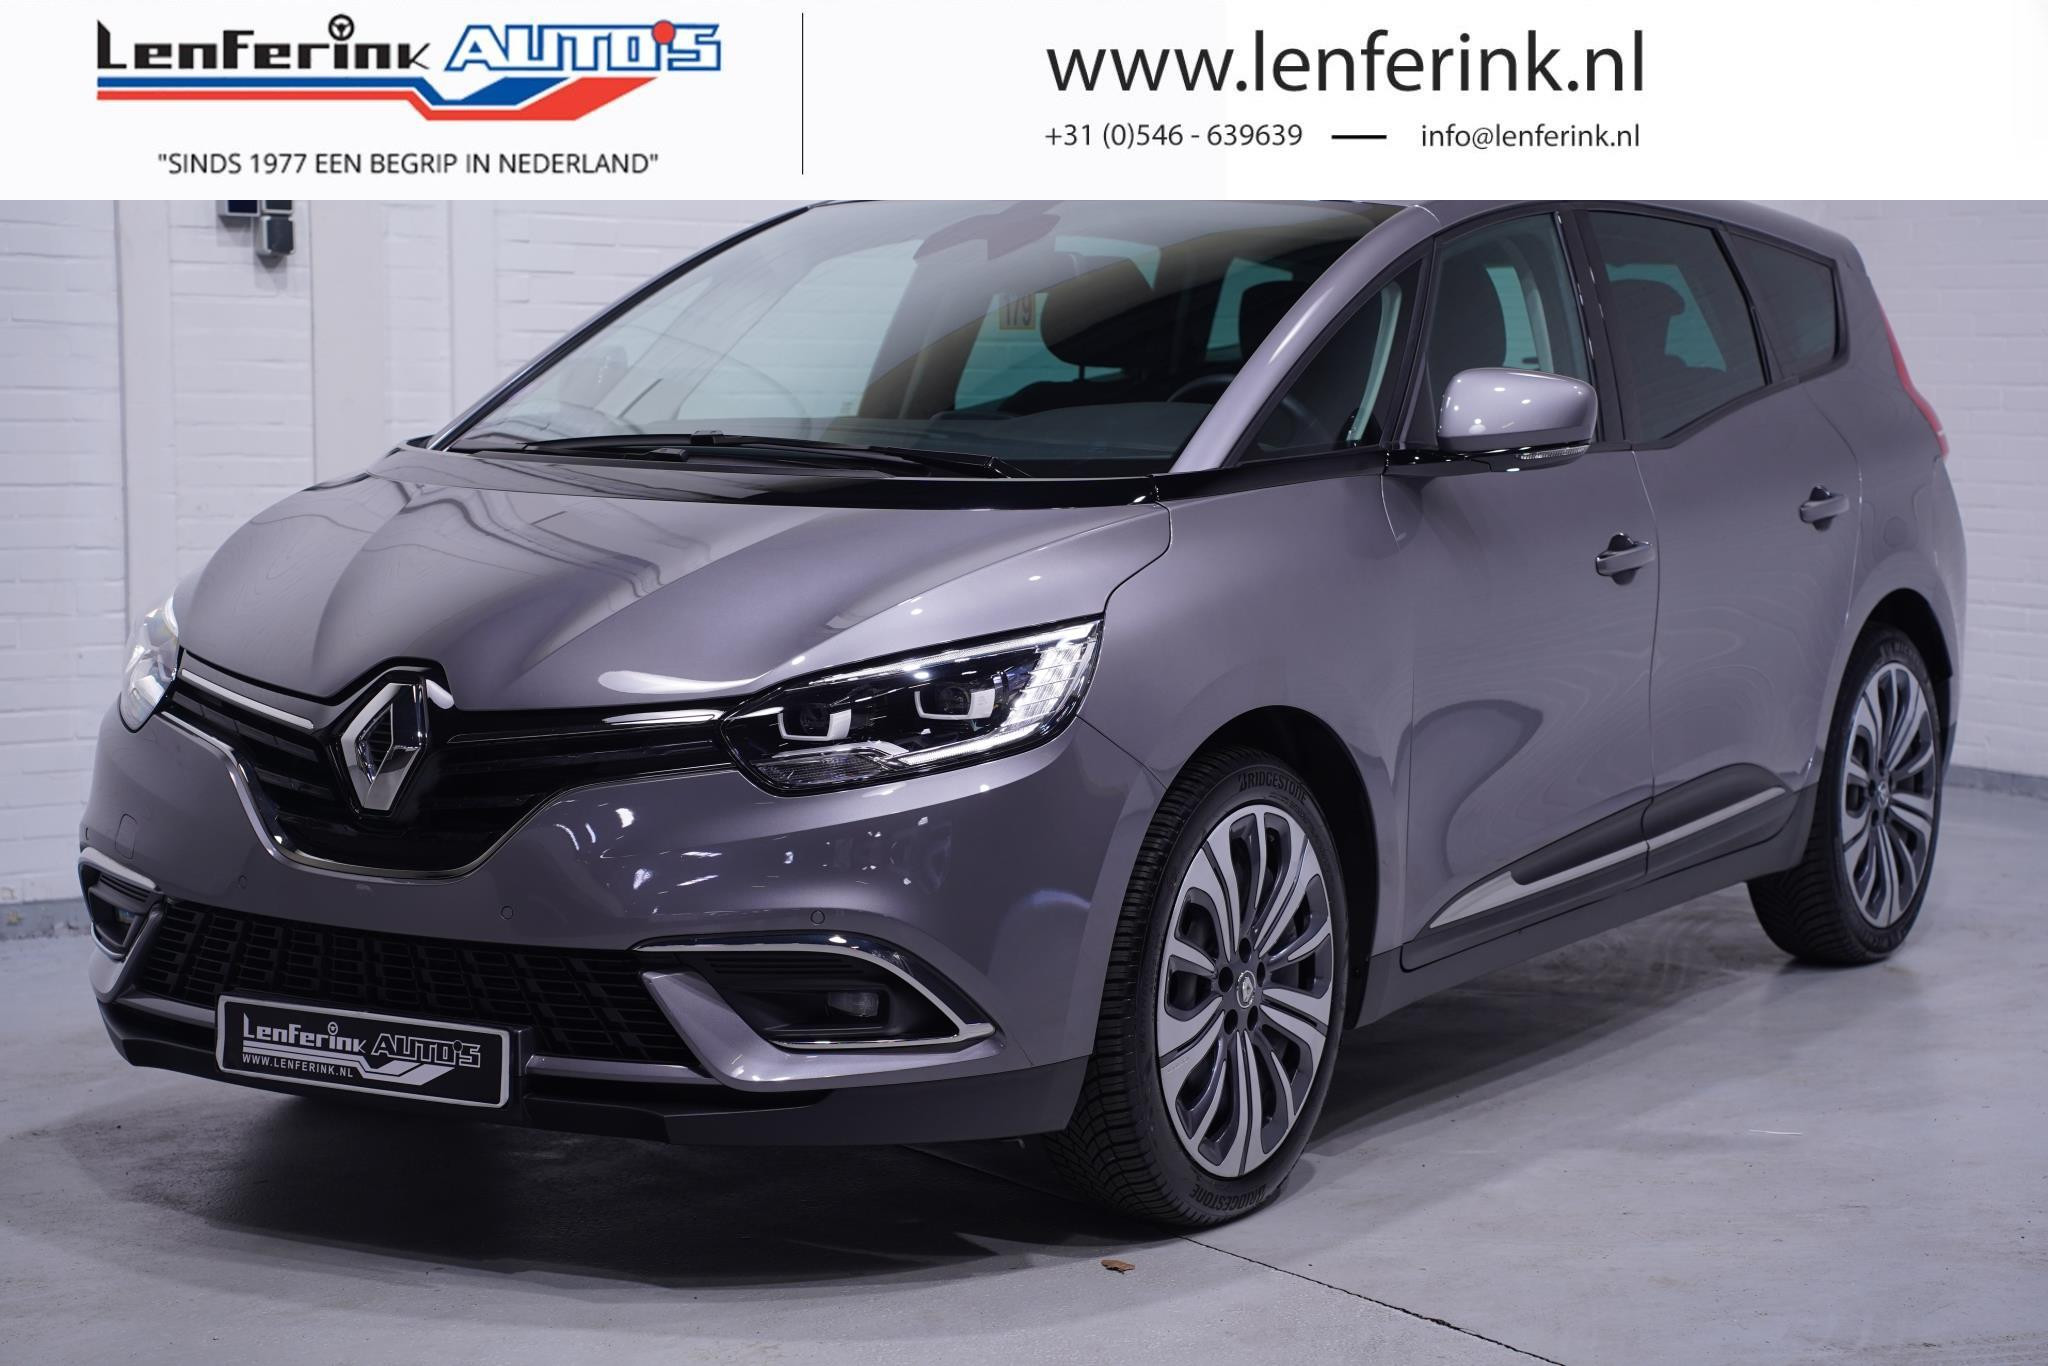 Renault Scénic E-Tech TCe 140 Equilibre 7-Persoons 20"inch private glas led voor en achter PDC v+a camera DAB ontvangst armsteun voor Apple carplay